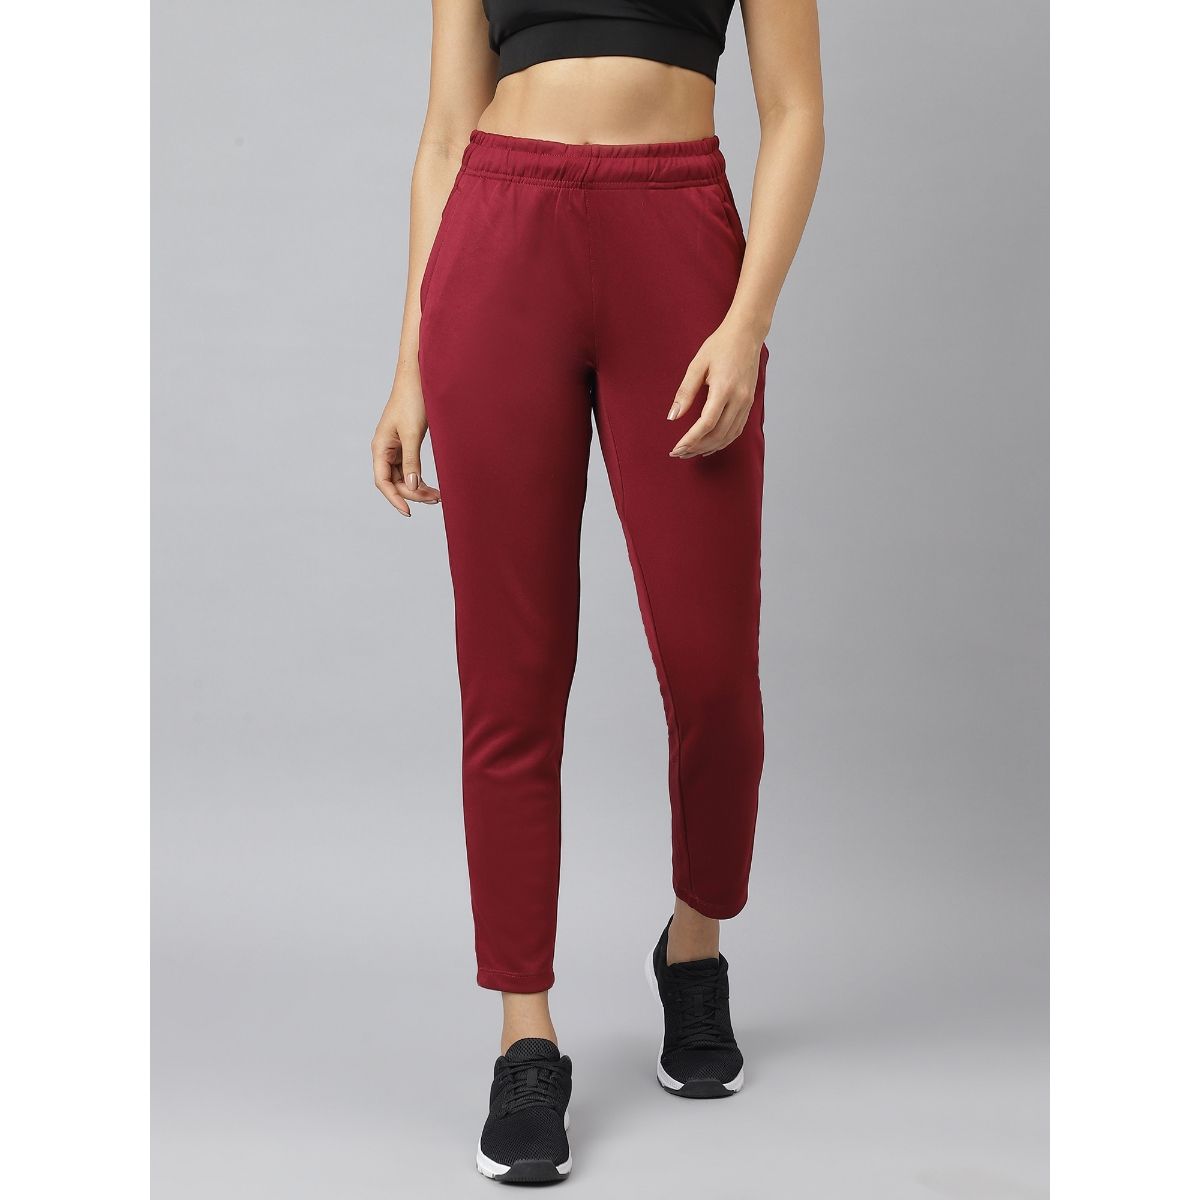 TINTED Joggers  Buy TINTED Maroon High Waist Track Pant Online  Nykaa  Fashion